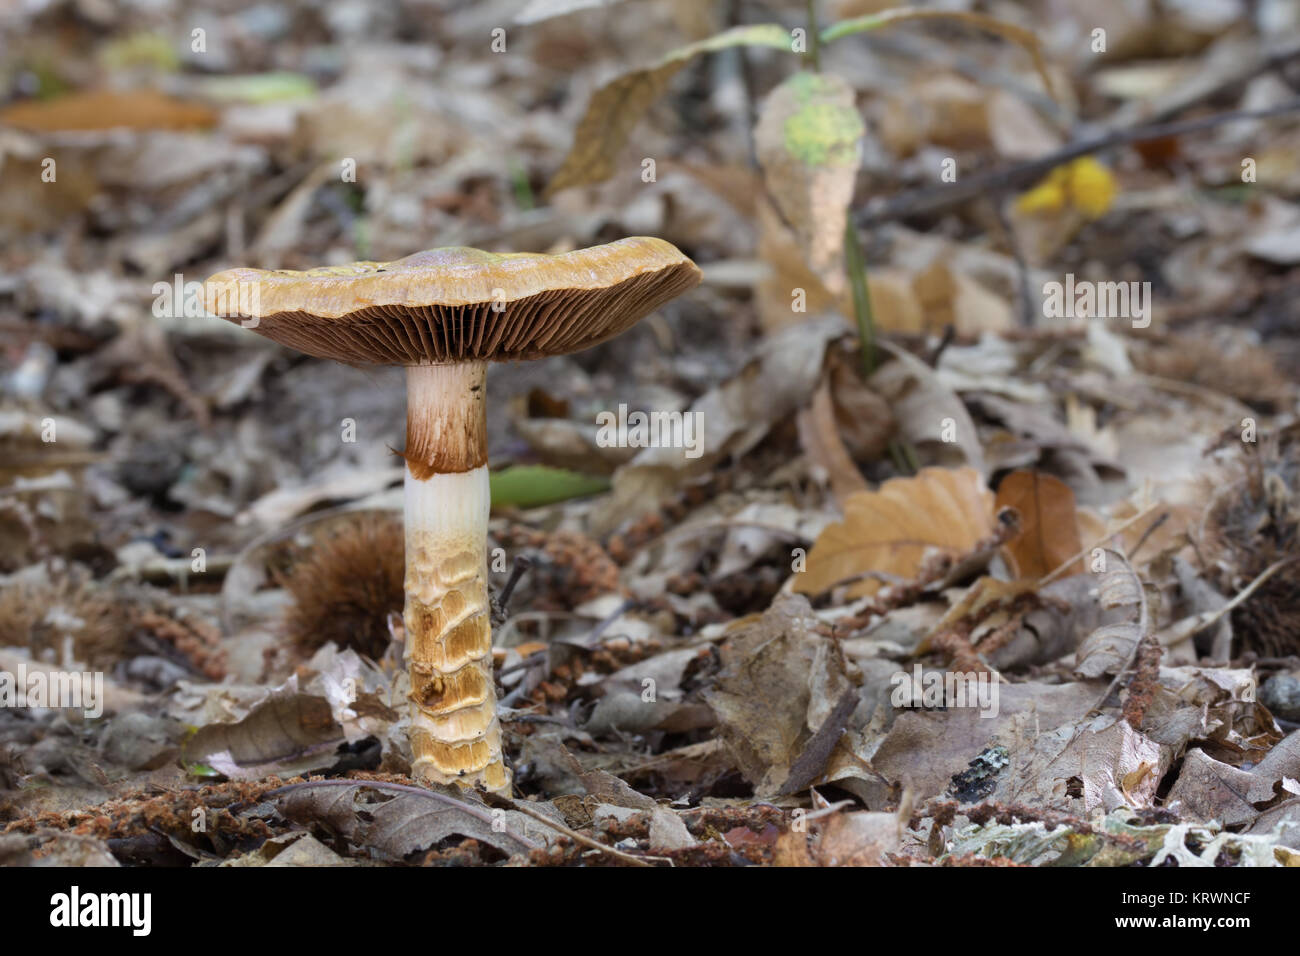 Mushroom photographed on the floor of a forest of chestnut trees. Stock Photo